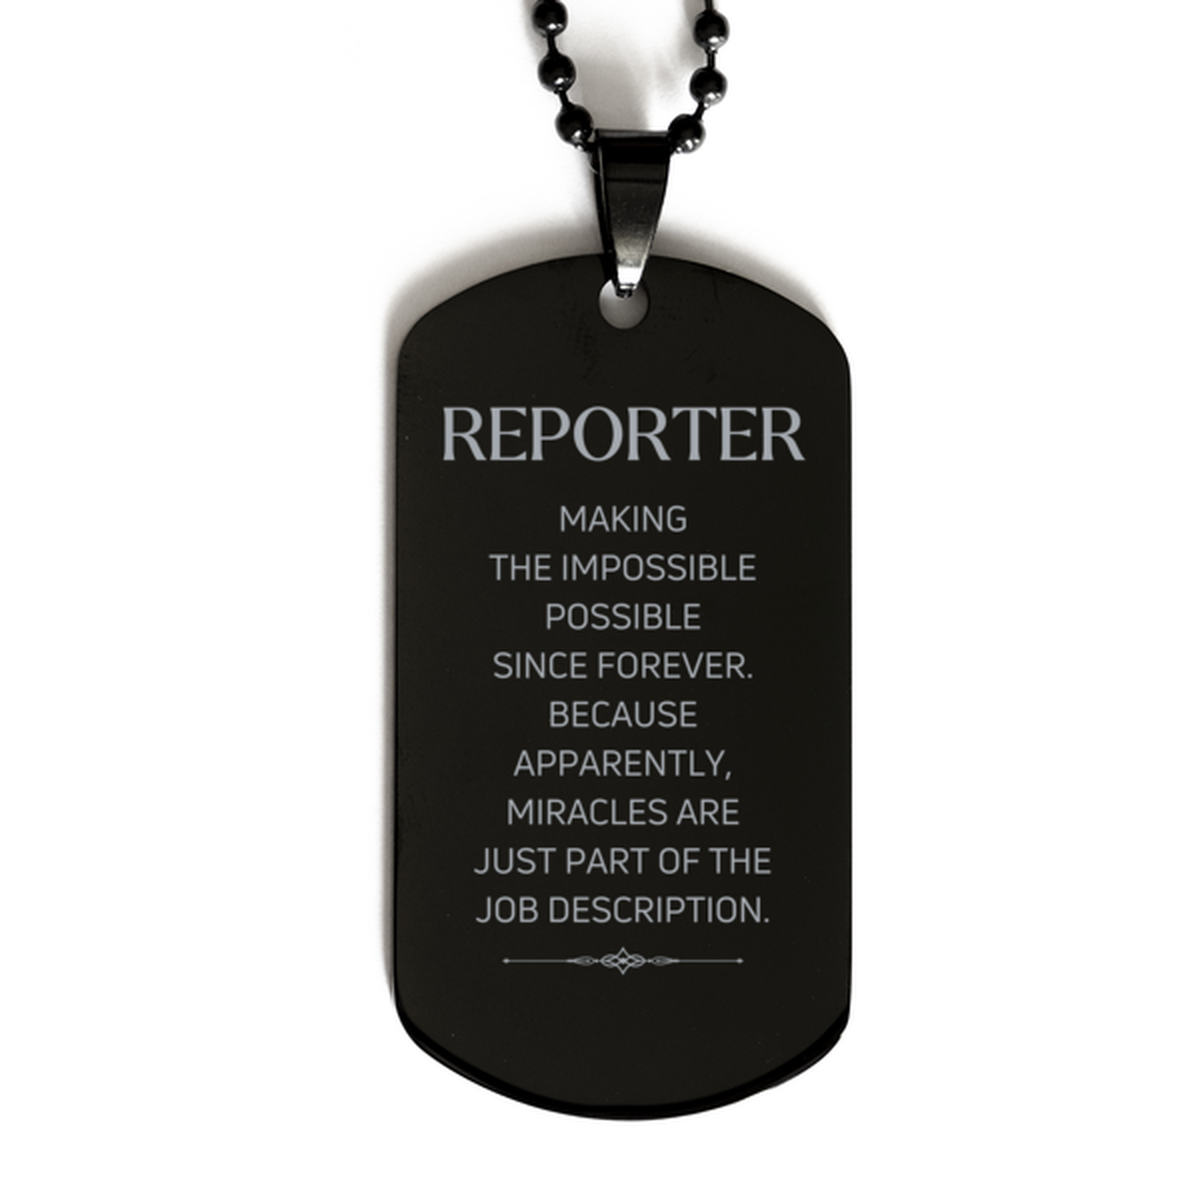 Funny Reporter Gifts, Miracles are just part of the job description, Inspirational Birthday Black Dog Tag For Reporter, Men, Women, Coworkers, Friends, Boss